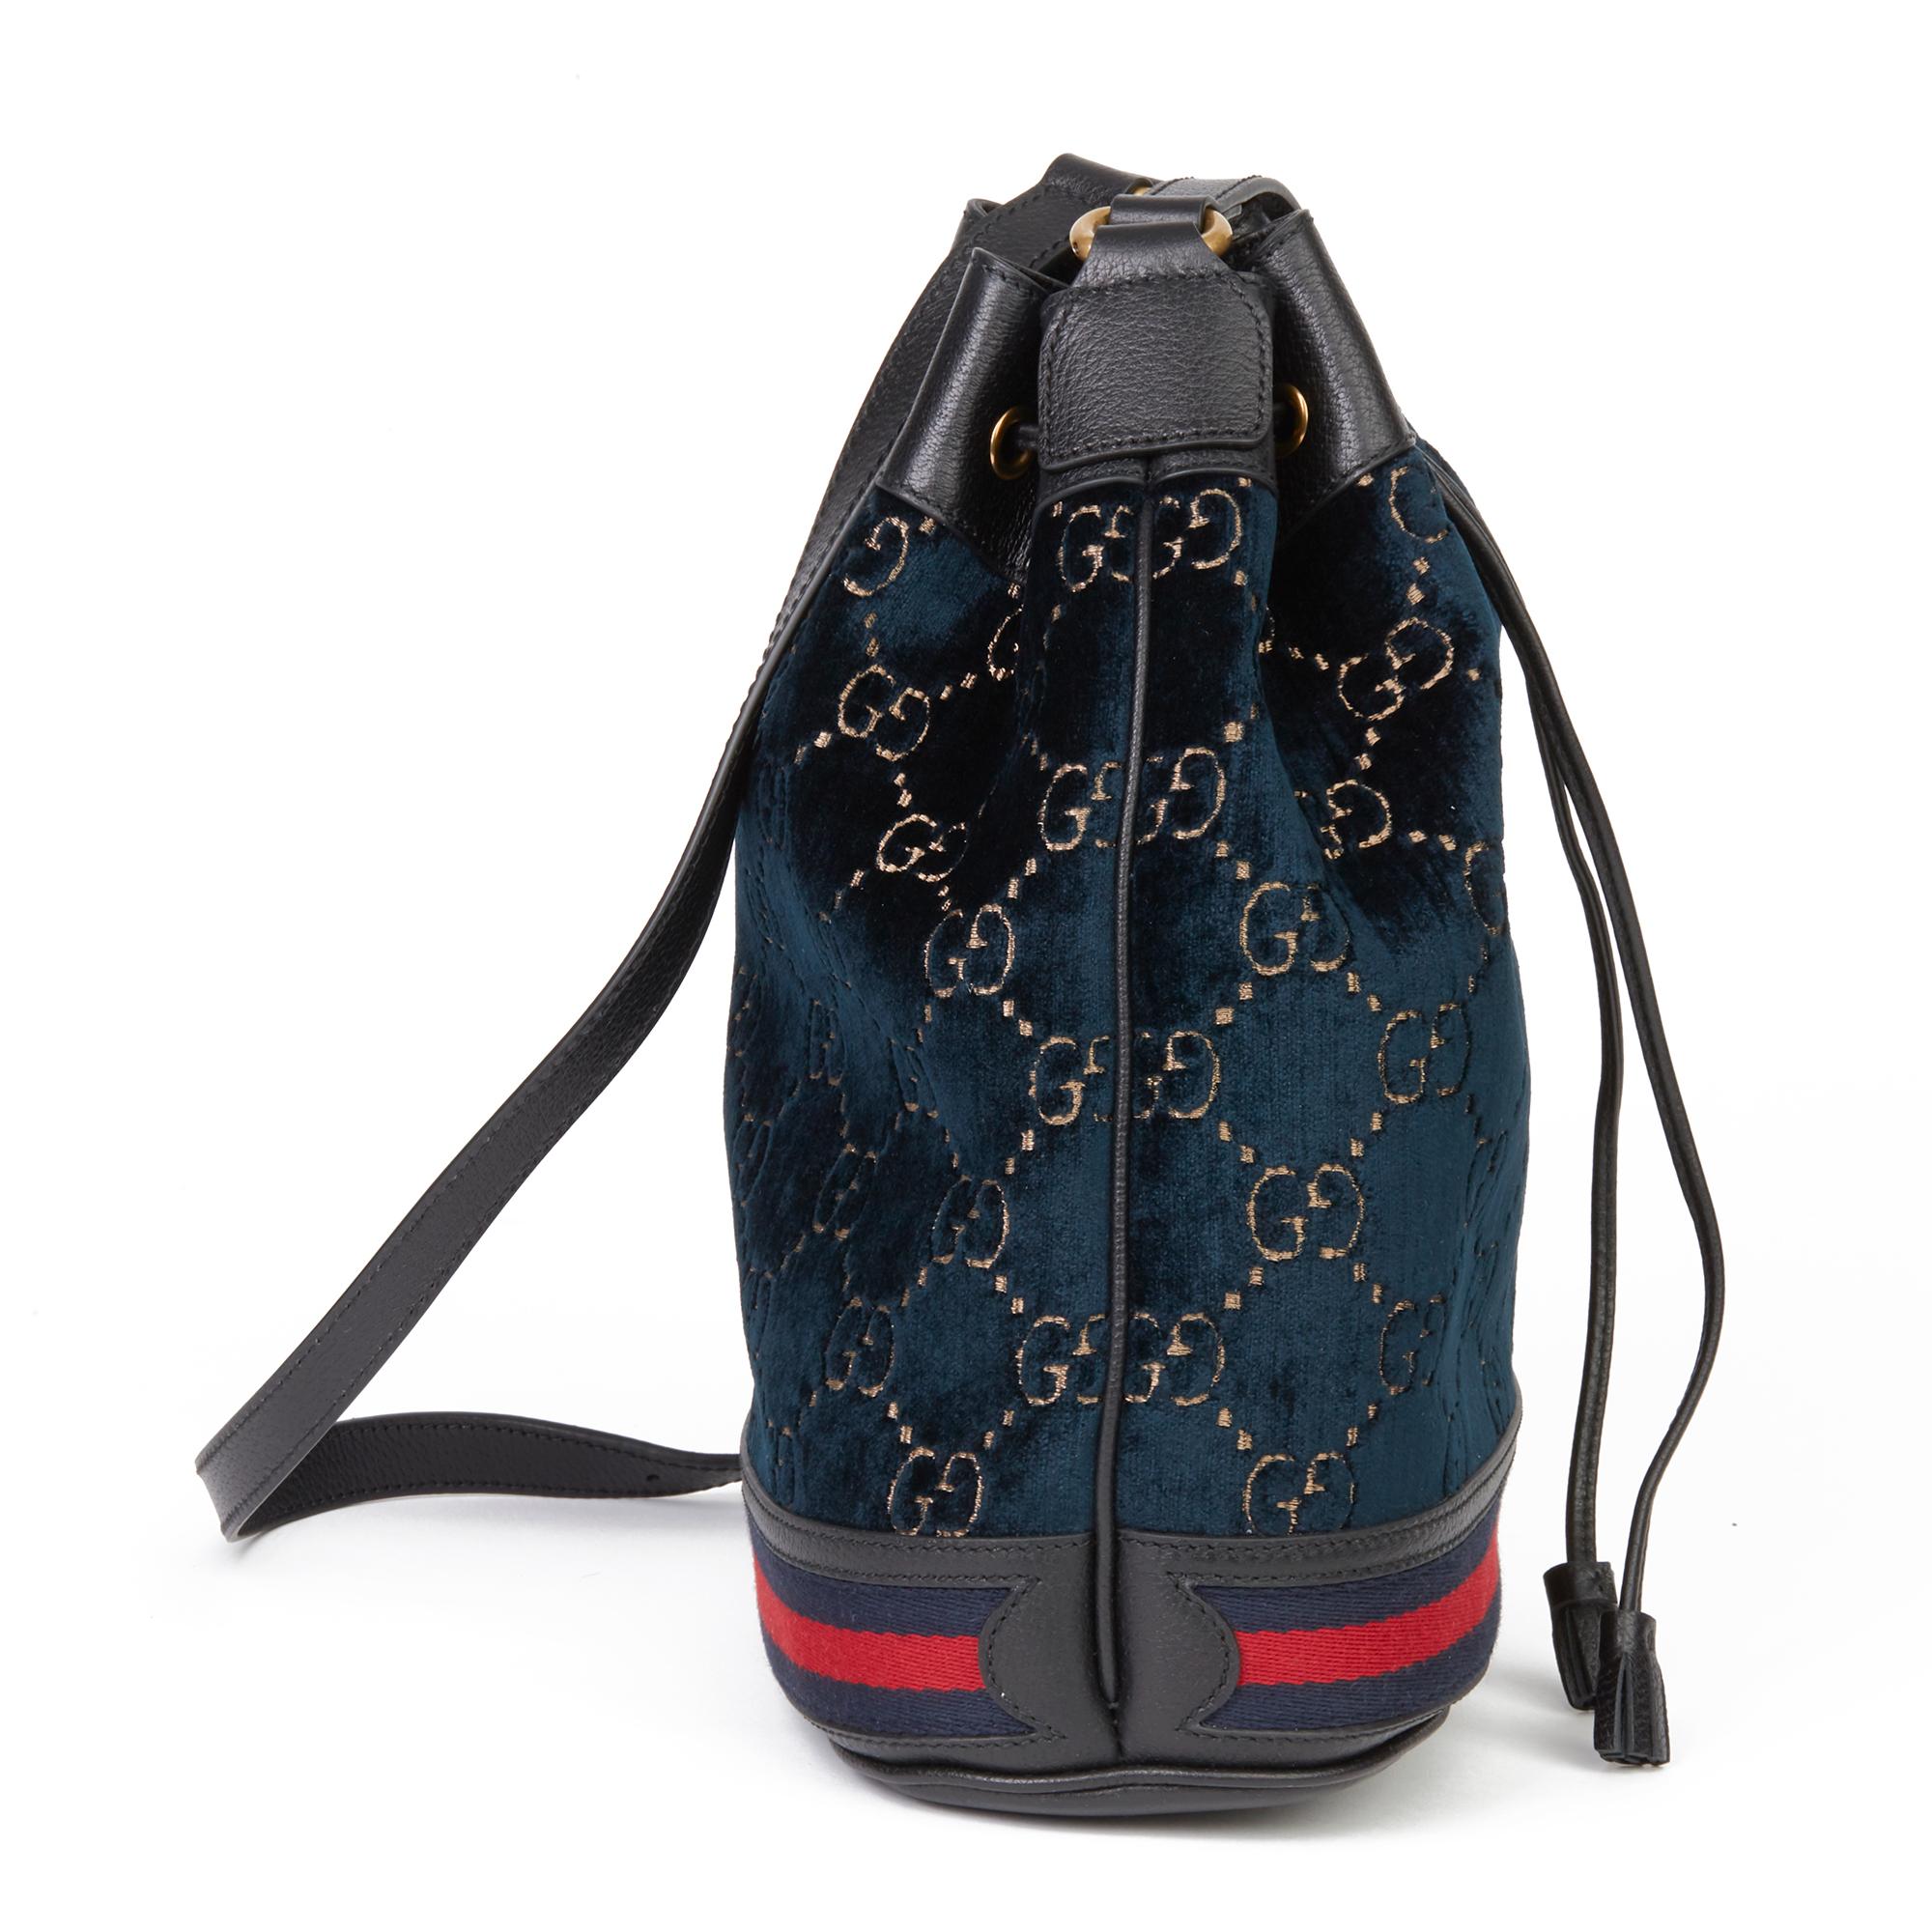 GUCCI
Dark Blue GG Velvet & Black Pigskin Leather Web Bucket Bag

Xupes Reference: HB3642
Serial Number: 574960 520981
Age (Circa): 2020
Accompanied By: Gucci Dust Bag, Care Booklet
Authenticity Details: Serial Sticker (Made in Italy)
Gender: